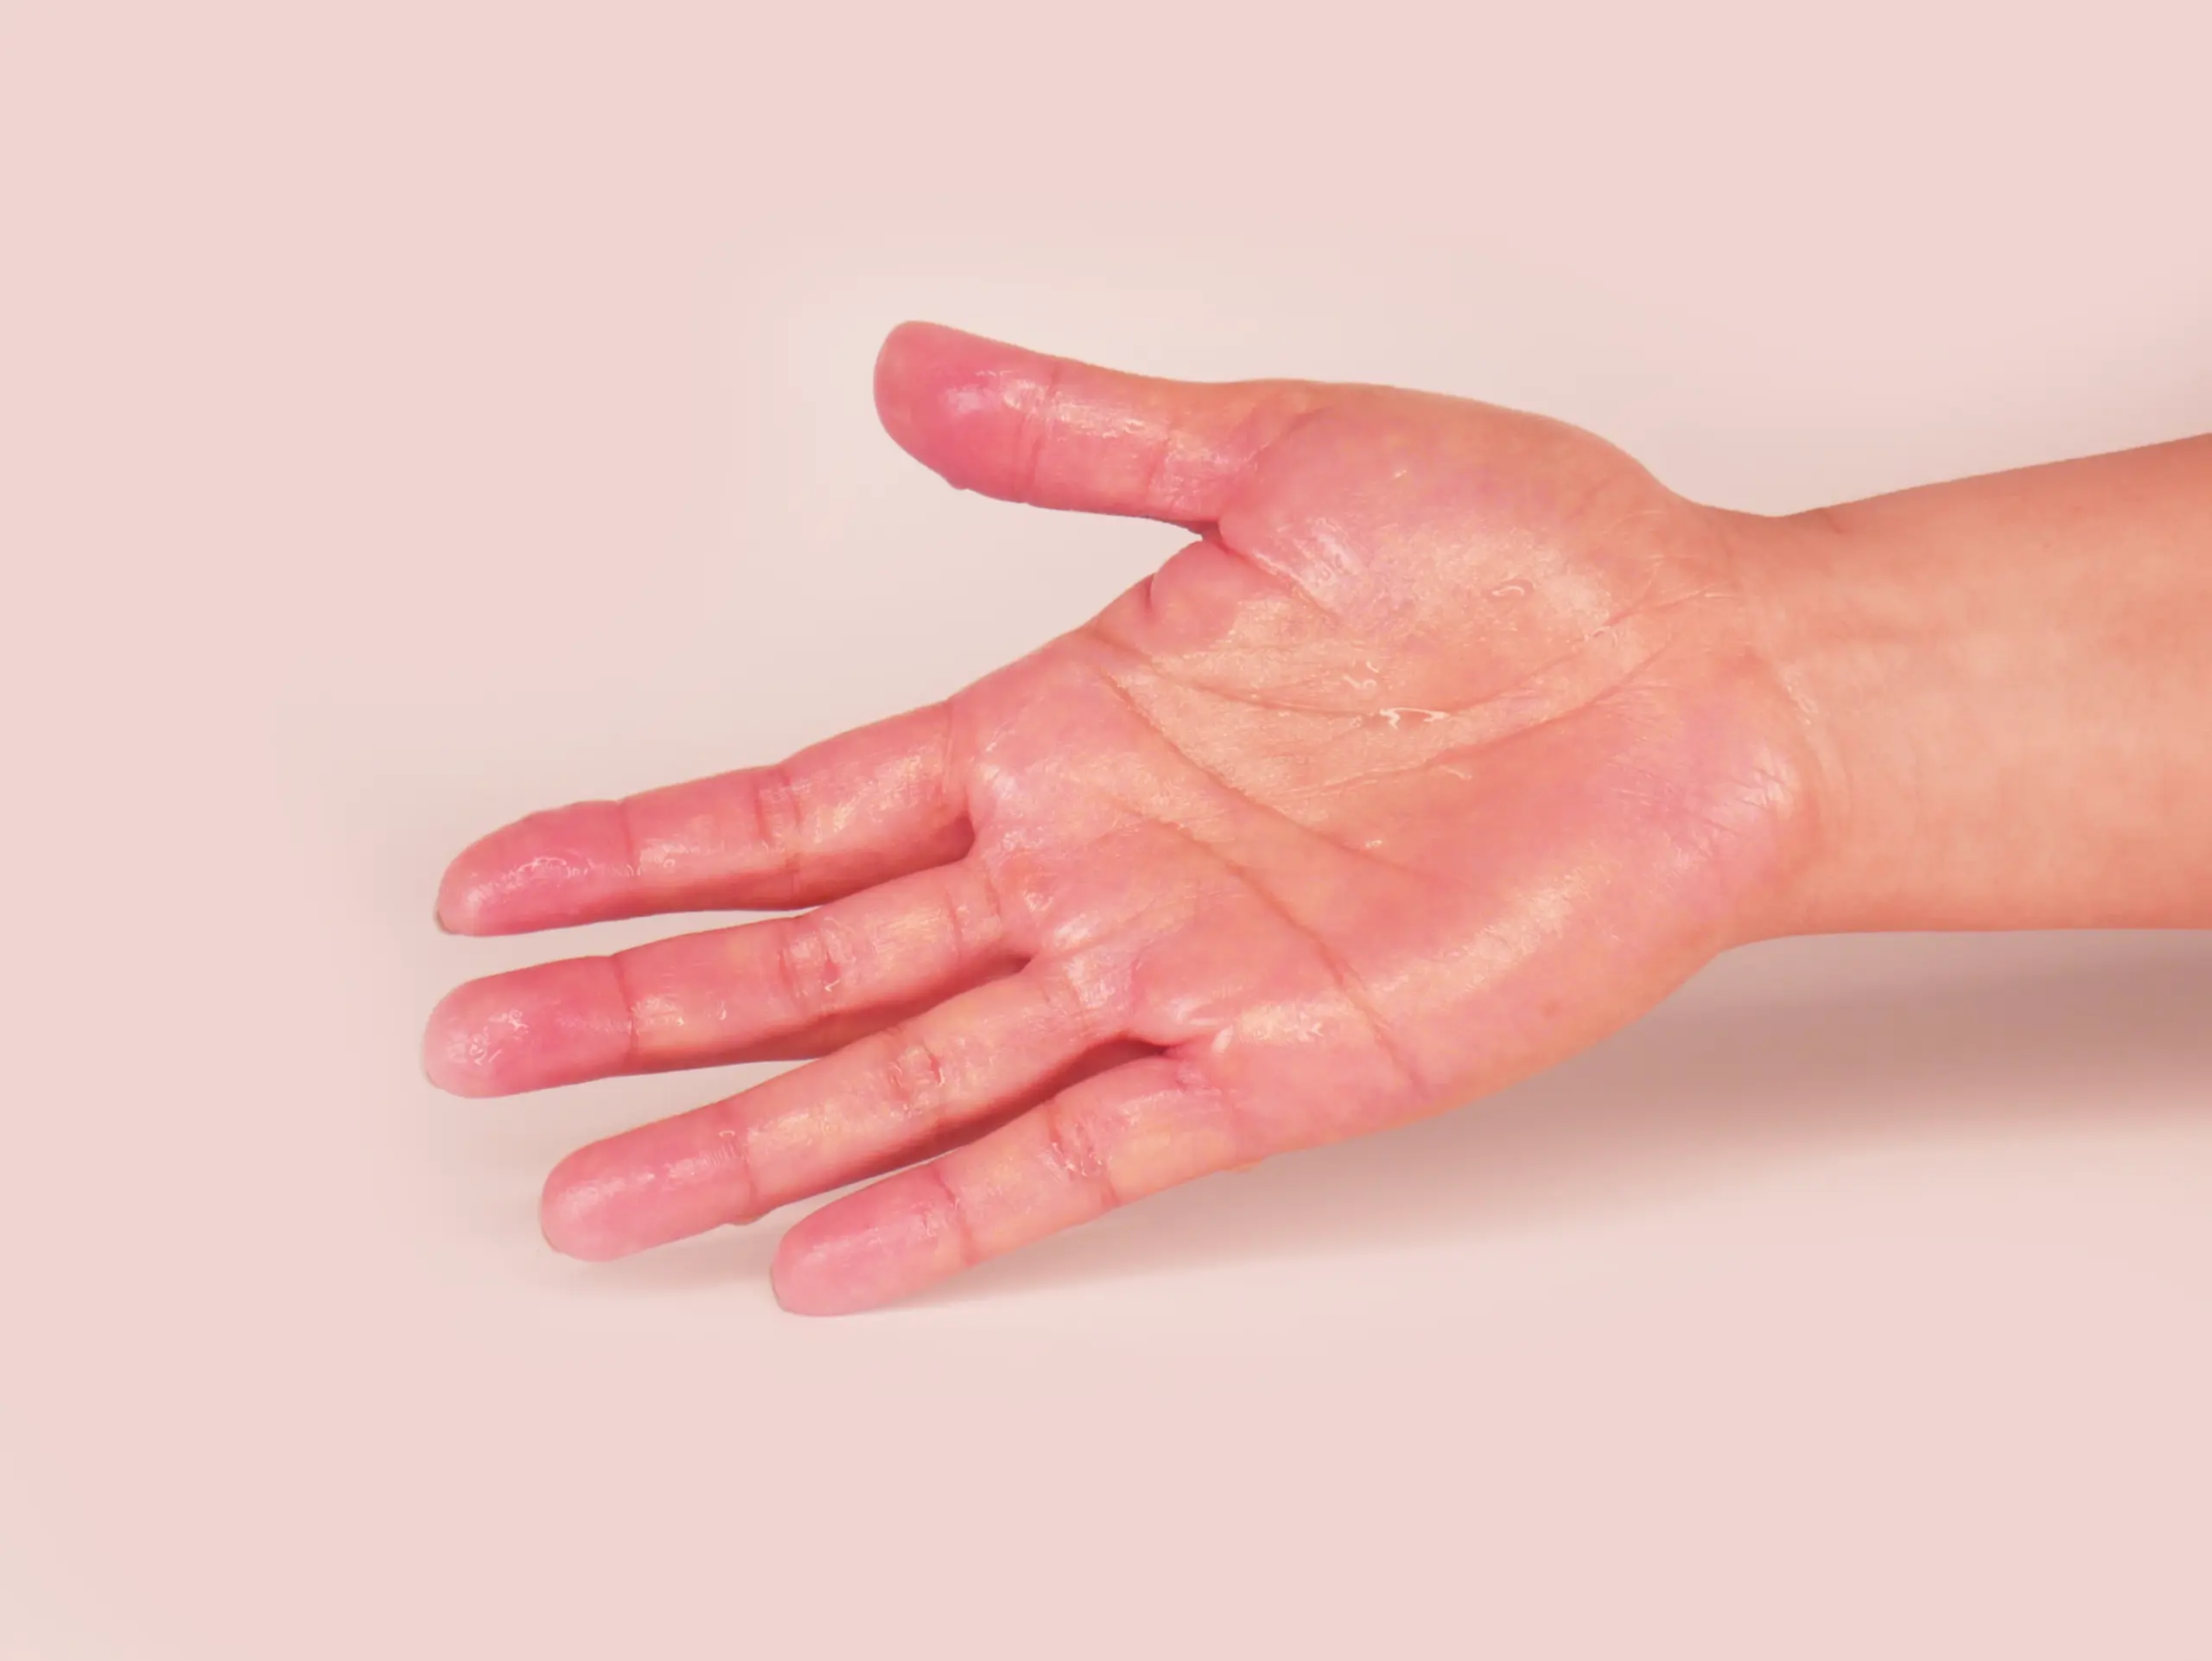 Close up image of a hand of a person who has hyperhidrosis. Hand covered in sweat. Pale pink background